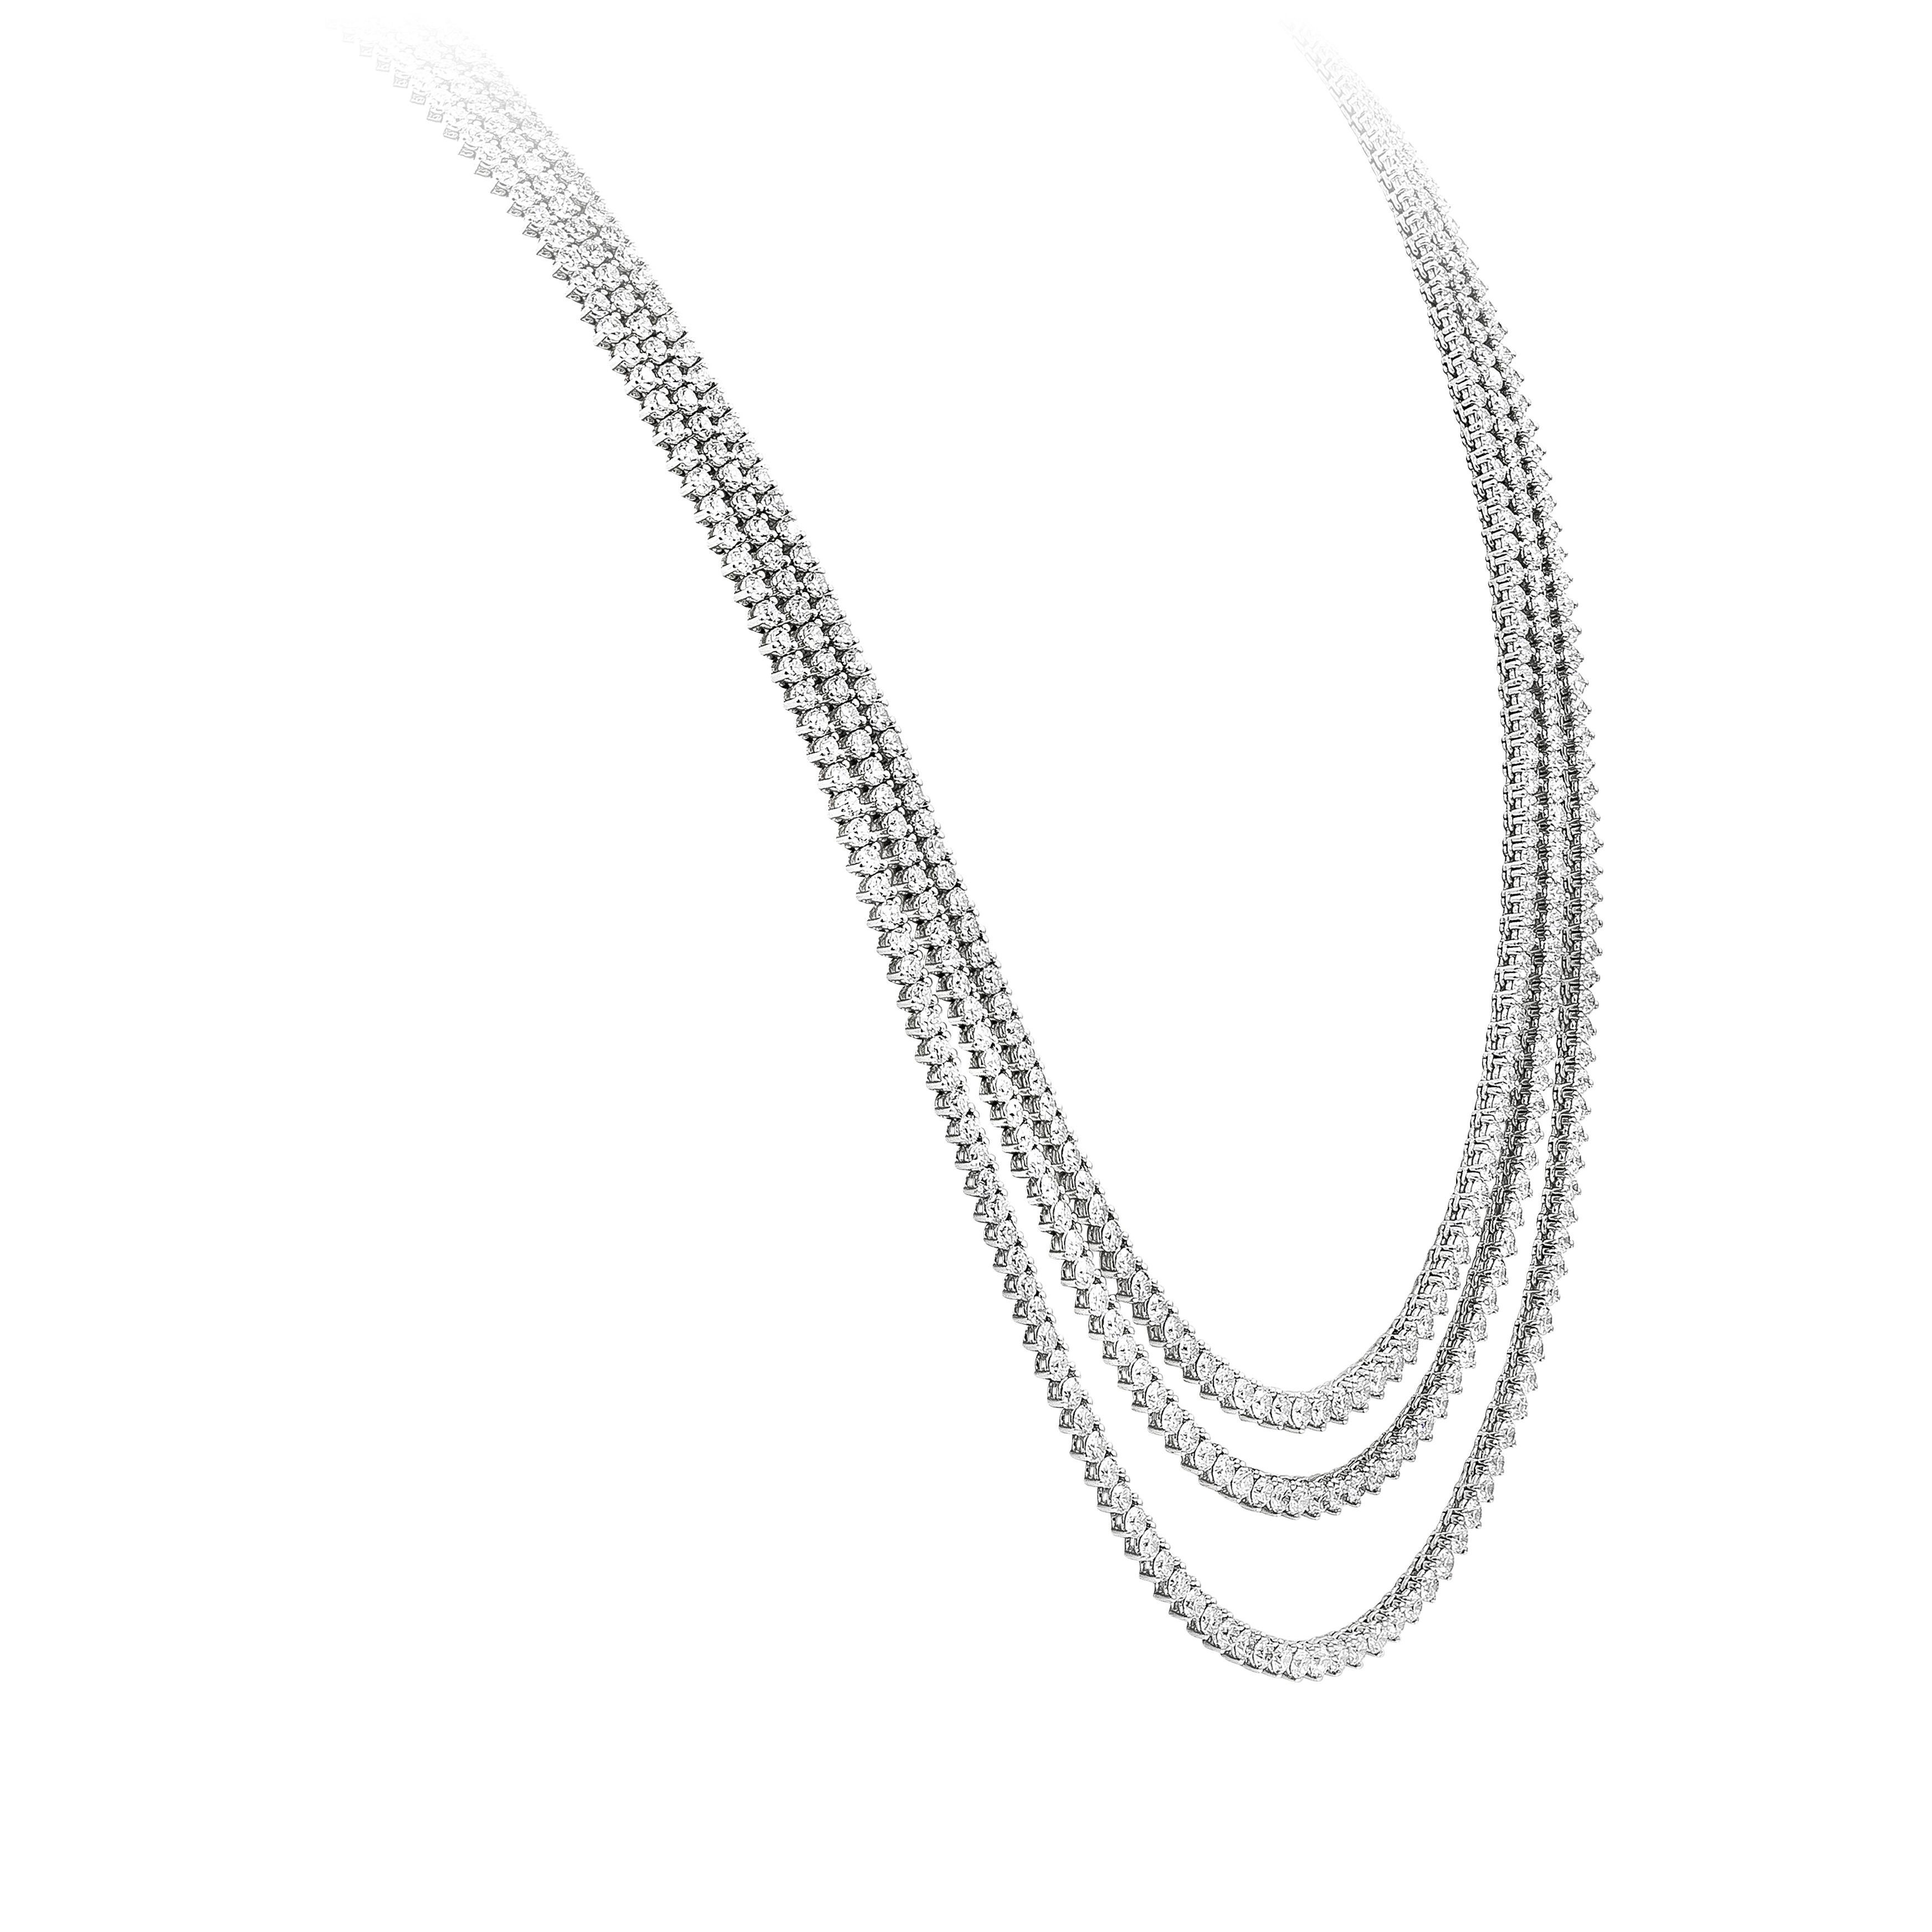 An important and beautiful multi-row tennis necklace showcasing three-rows of graduating lengths, set with round brilliant diamonds weighing 54.16 carats total. Each diamond is set on a chic three-prong basket setting and made in 18K white gold.